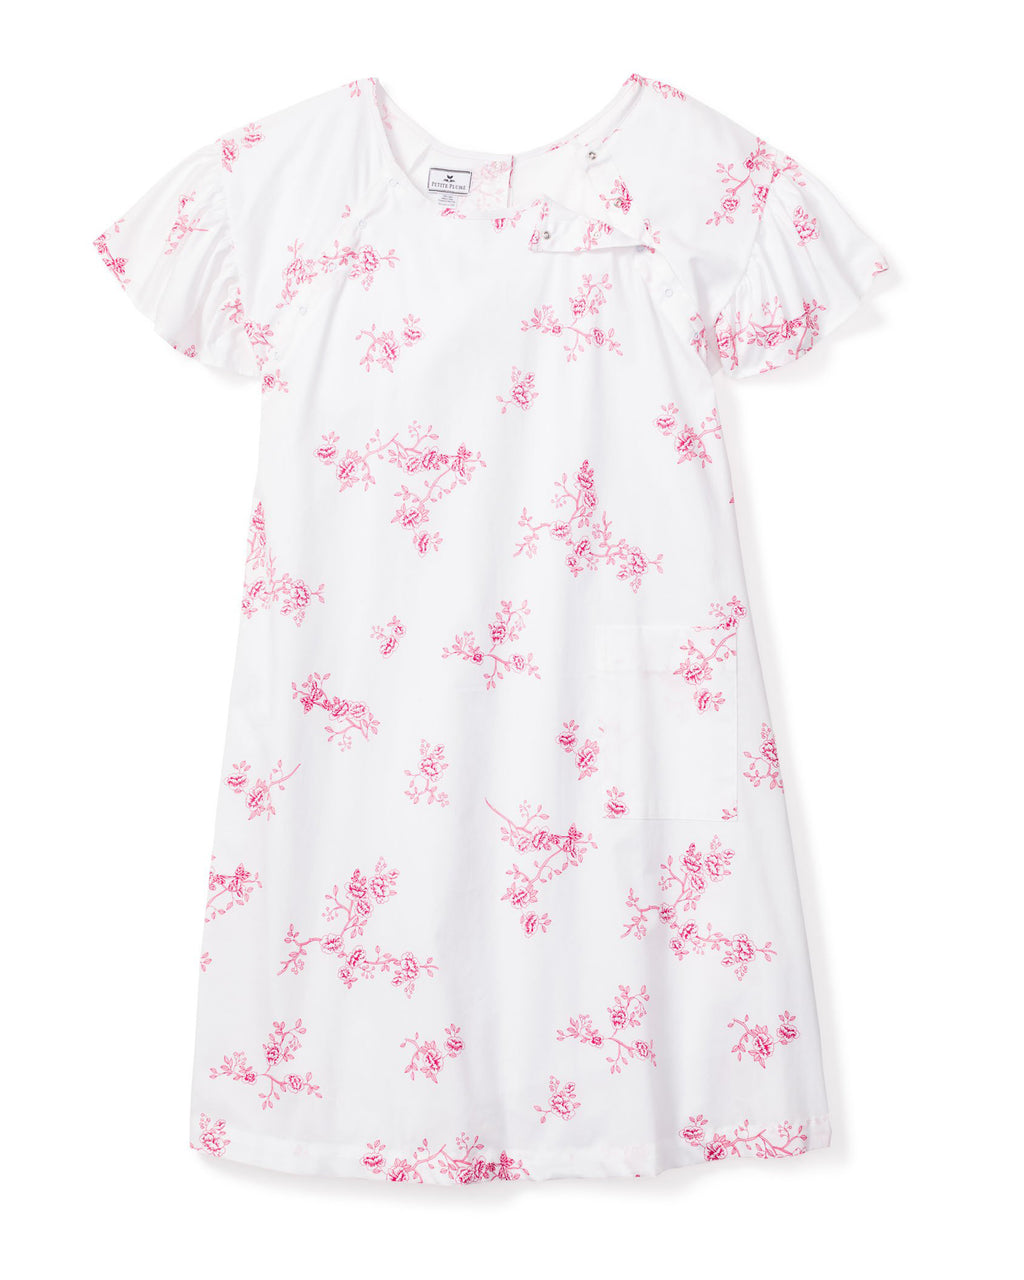 English Rose Floral Hospital Gown – Petite Plume